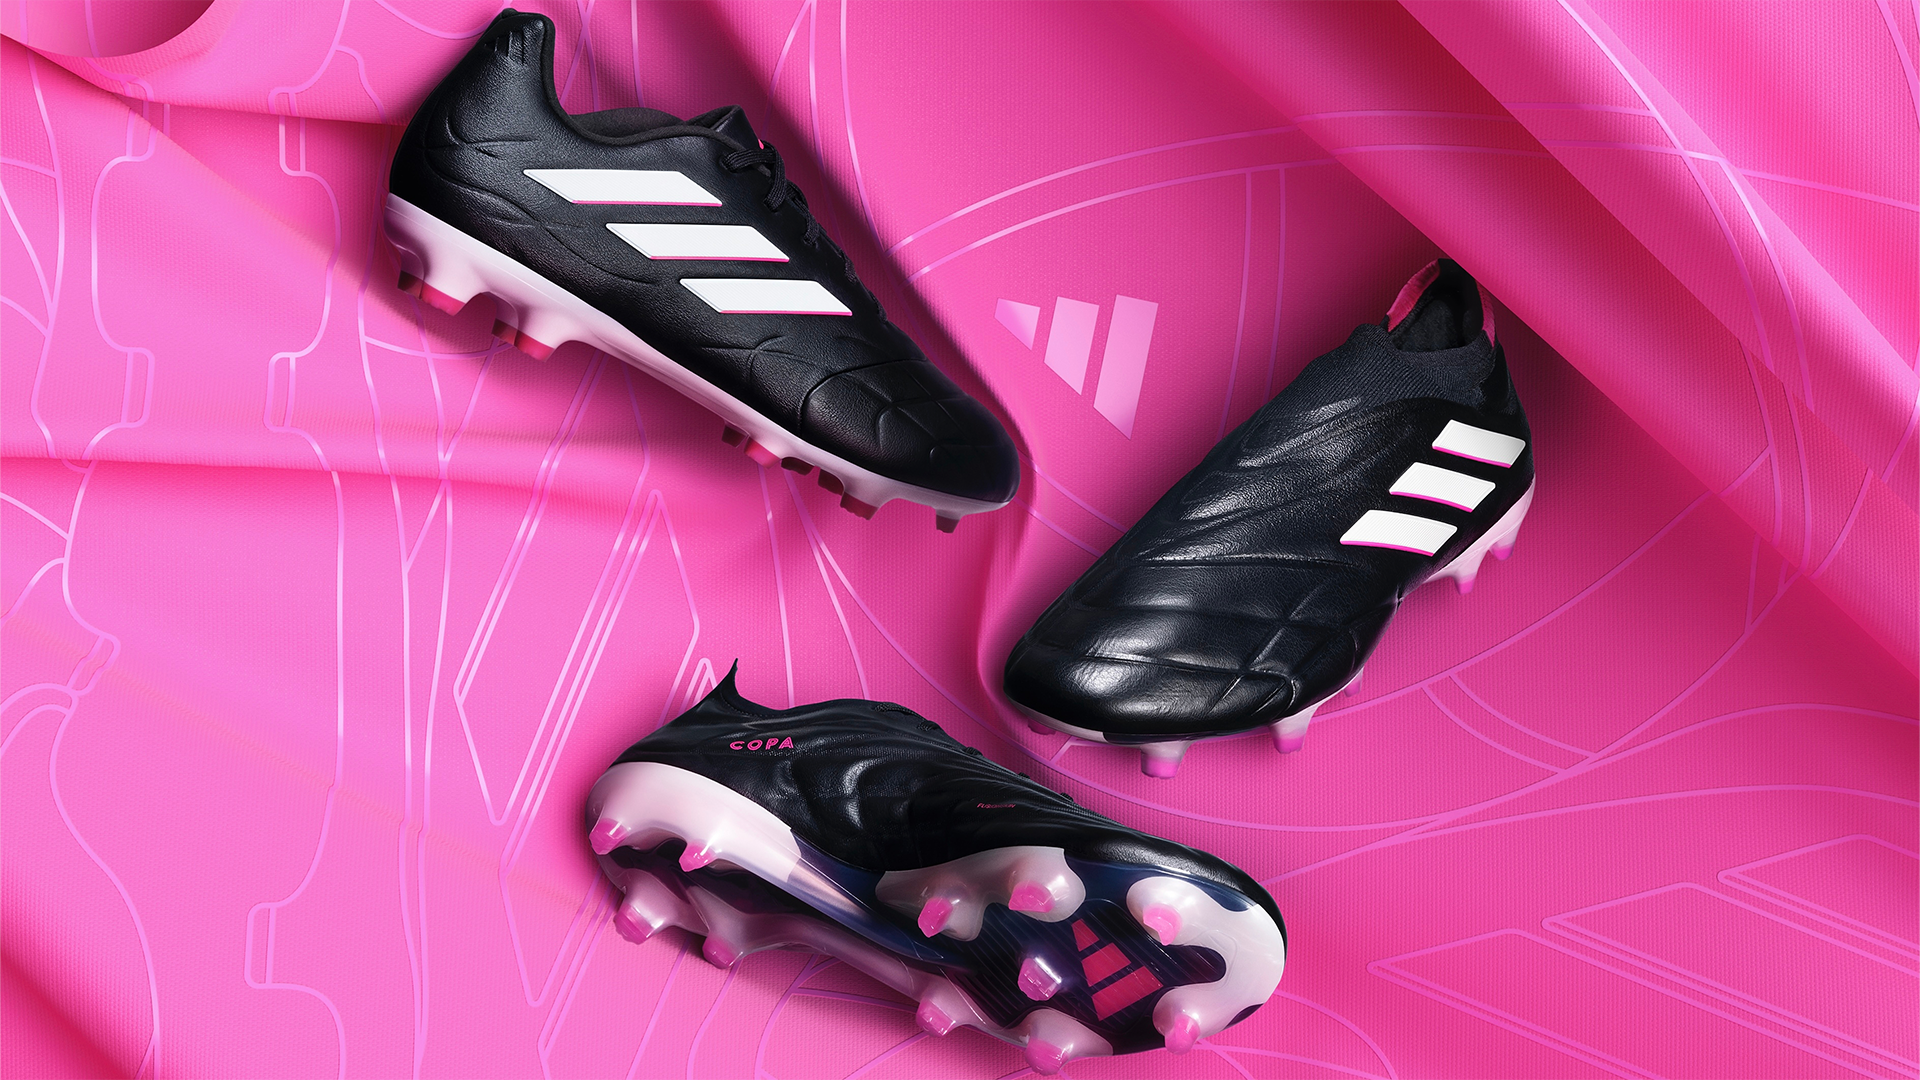 adidas expands the with new COPA Pure colourways | Goal.com Cameroon